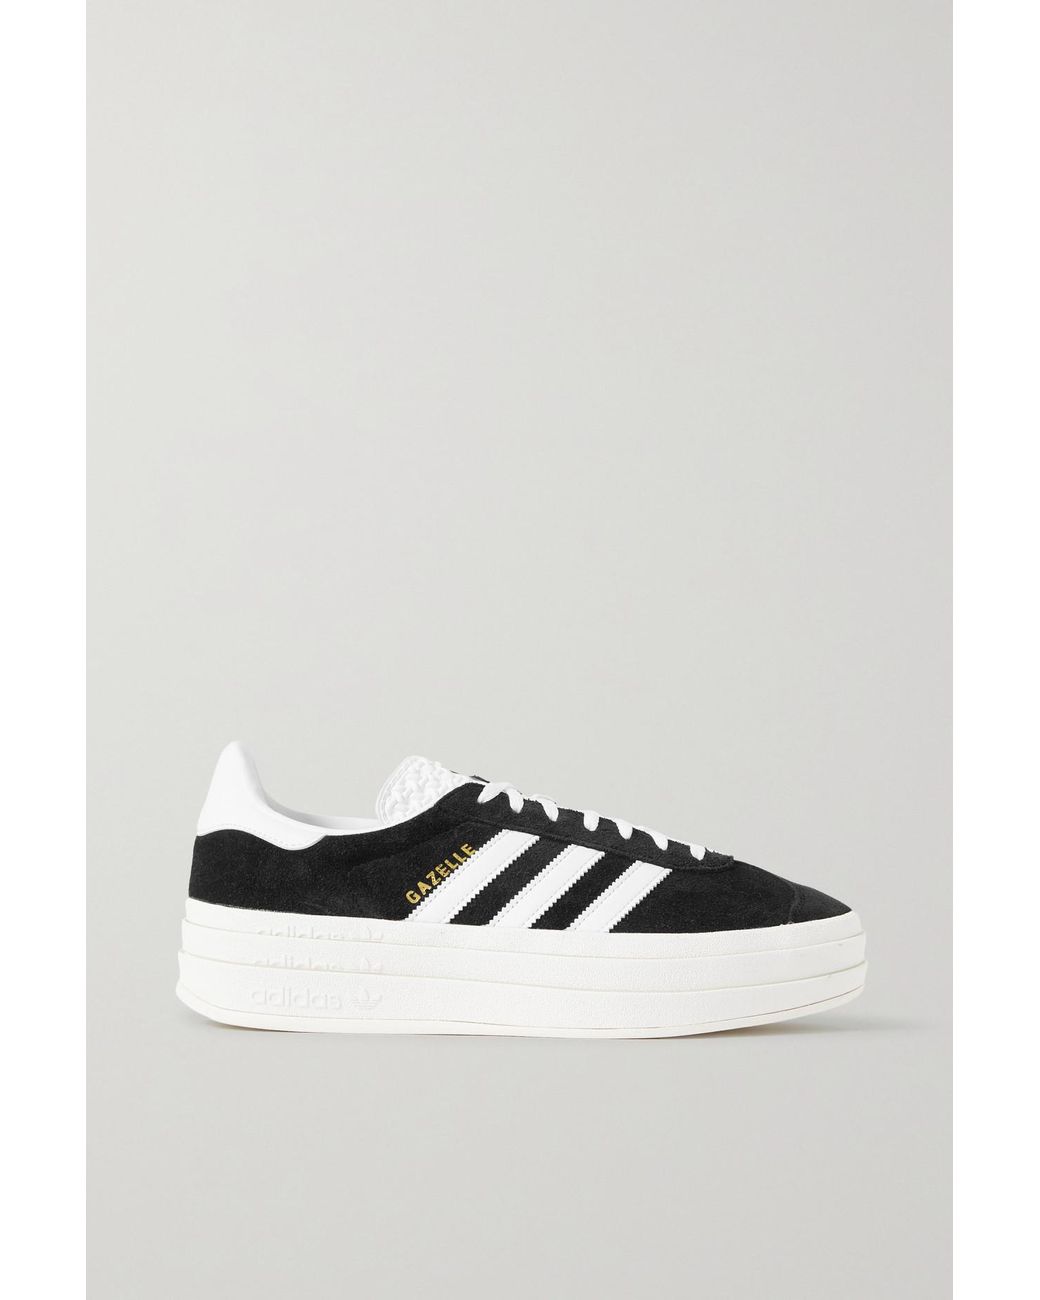 Adidas Originals Gazelle Bold Leather-Trimmed Suede Sneakers In Grey | Lyst  Uk